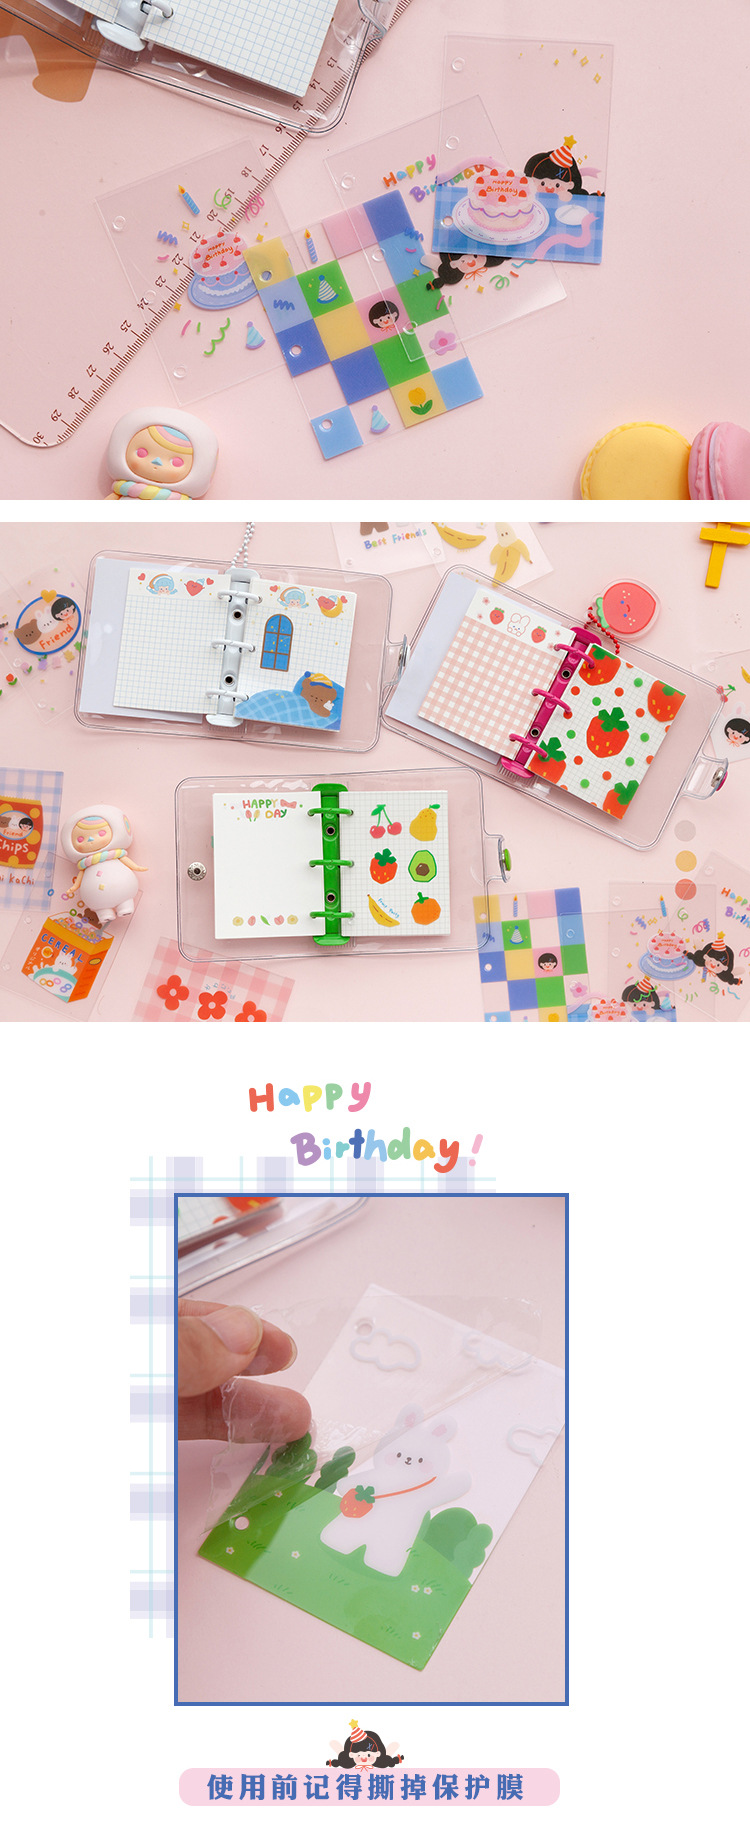 Life Fun Series 4pcs PVC Kawii 3-hole mini book separator Notebook Spiral Binder Index Page Dividers Diary Book Stationery